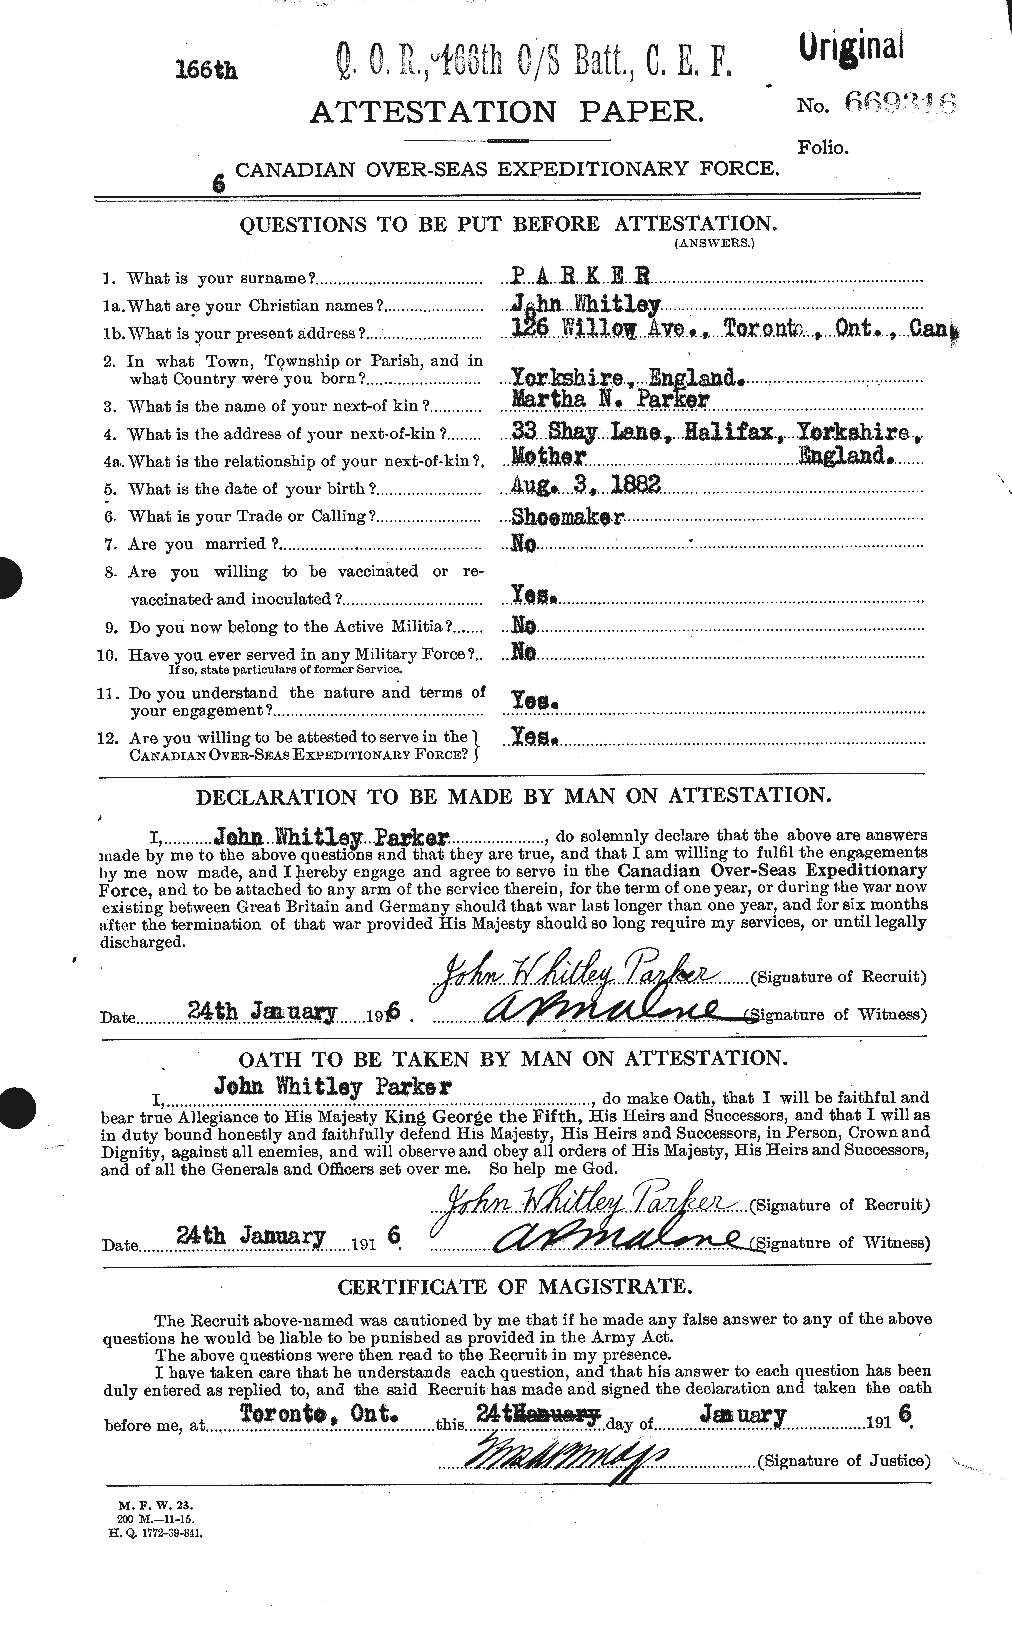 Personnel Records of the First World War - CEF 565493a